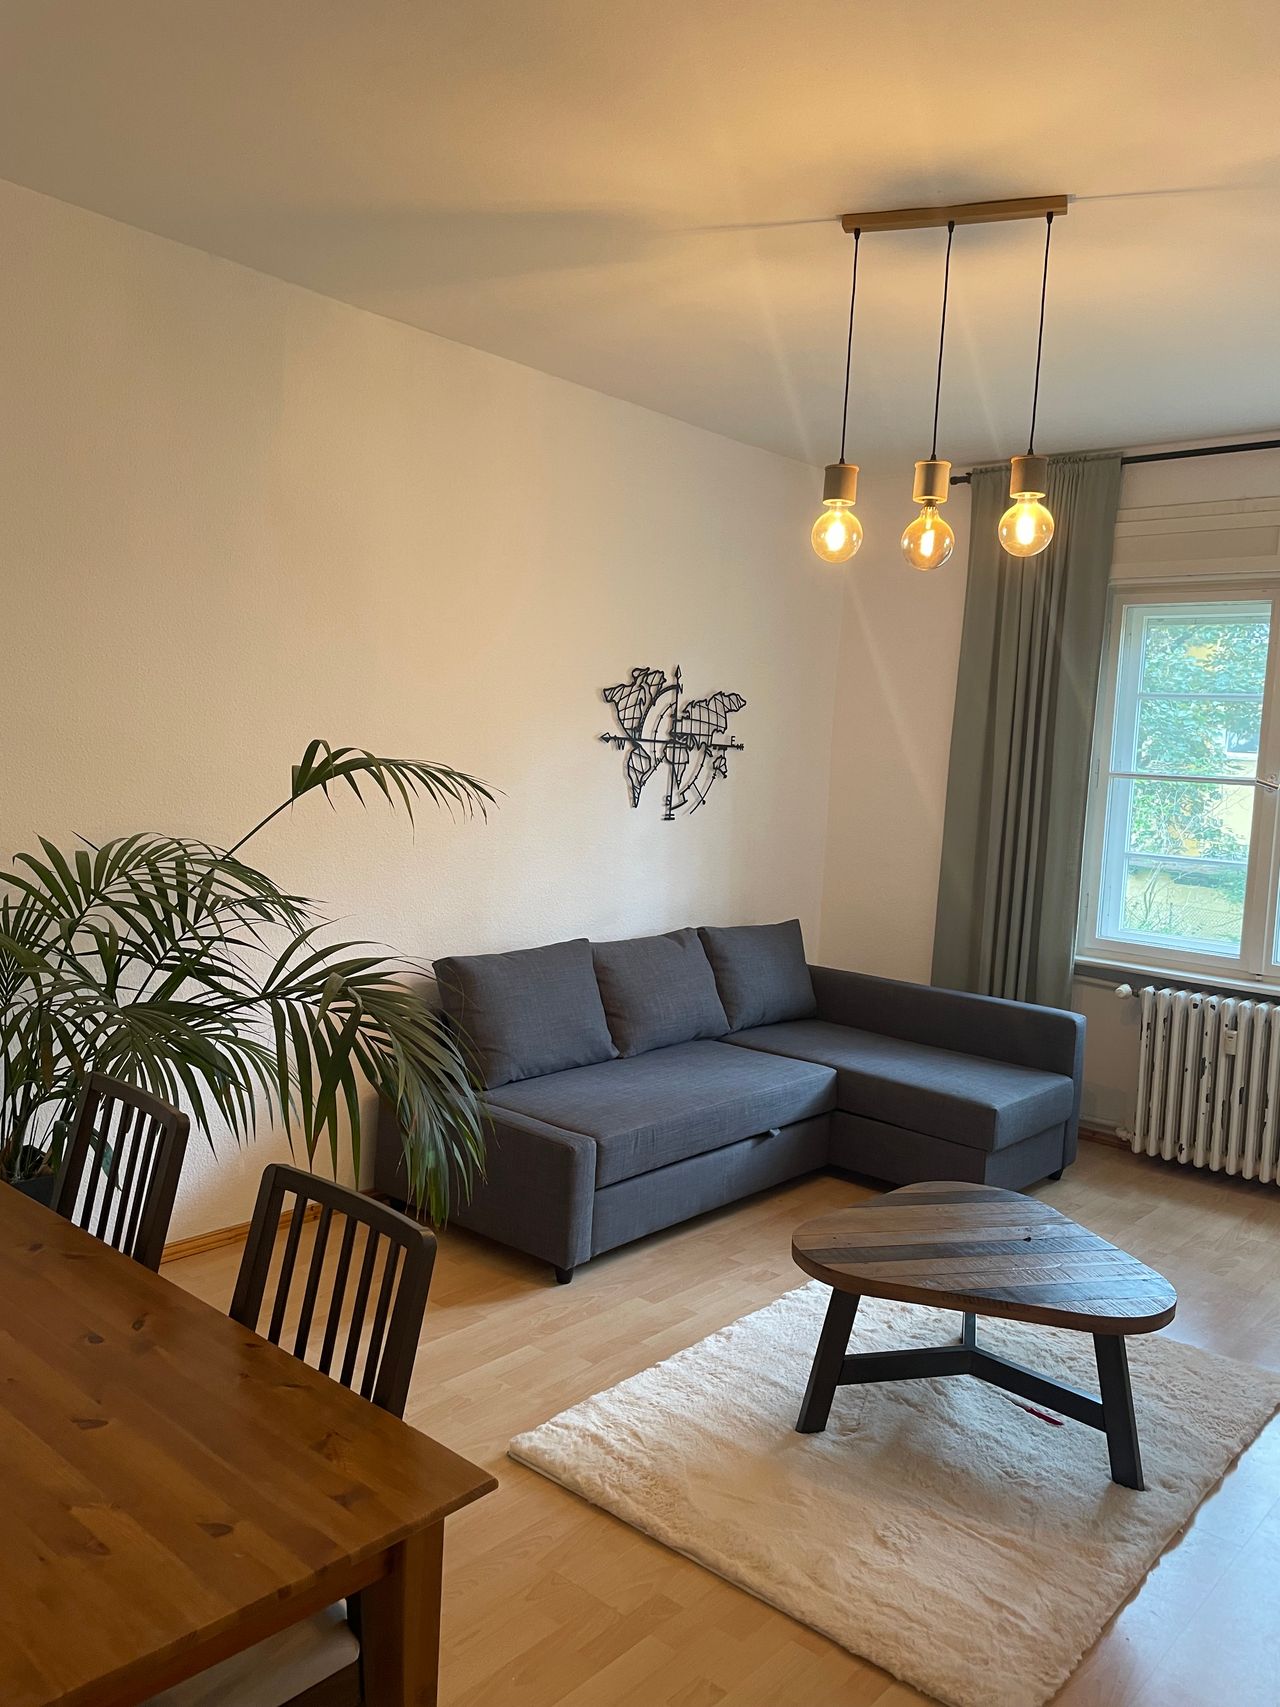 Awesome & quiet apartment in Charlottenburg